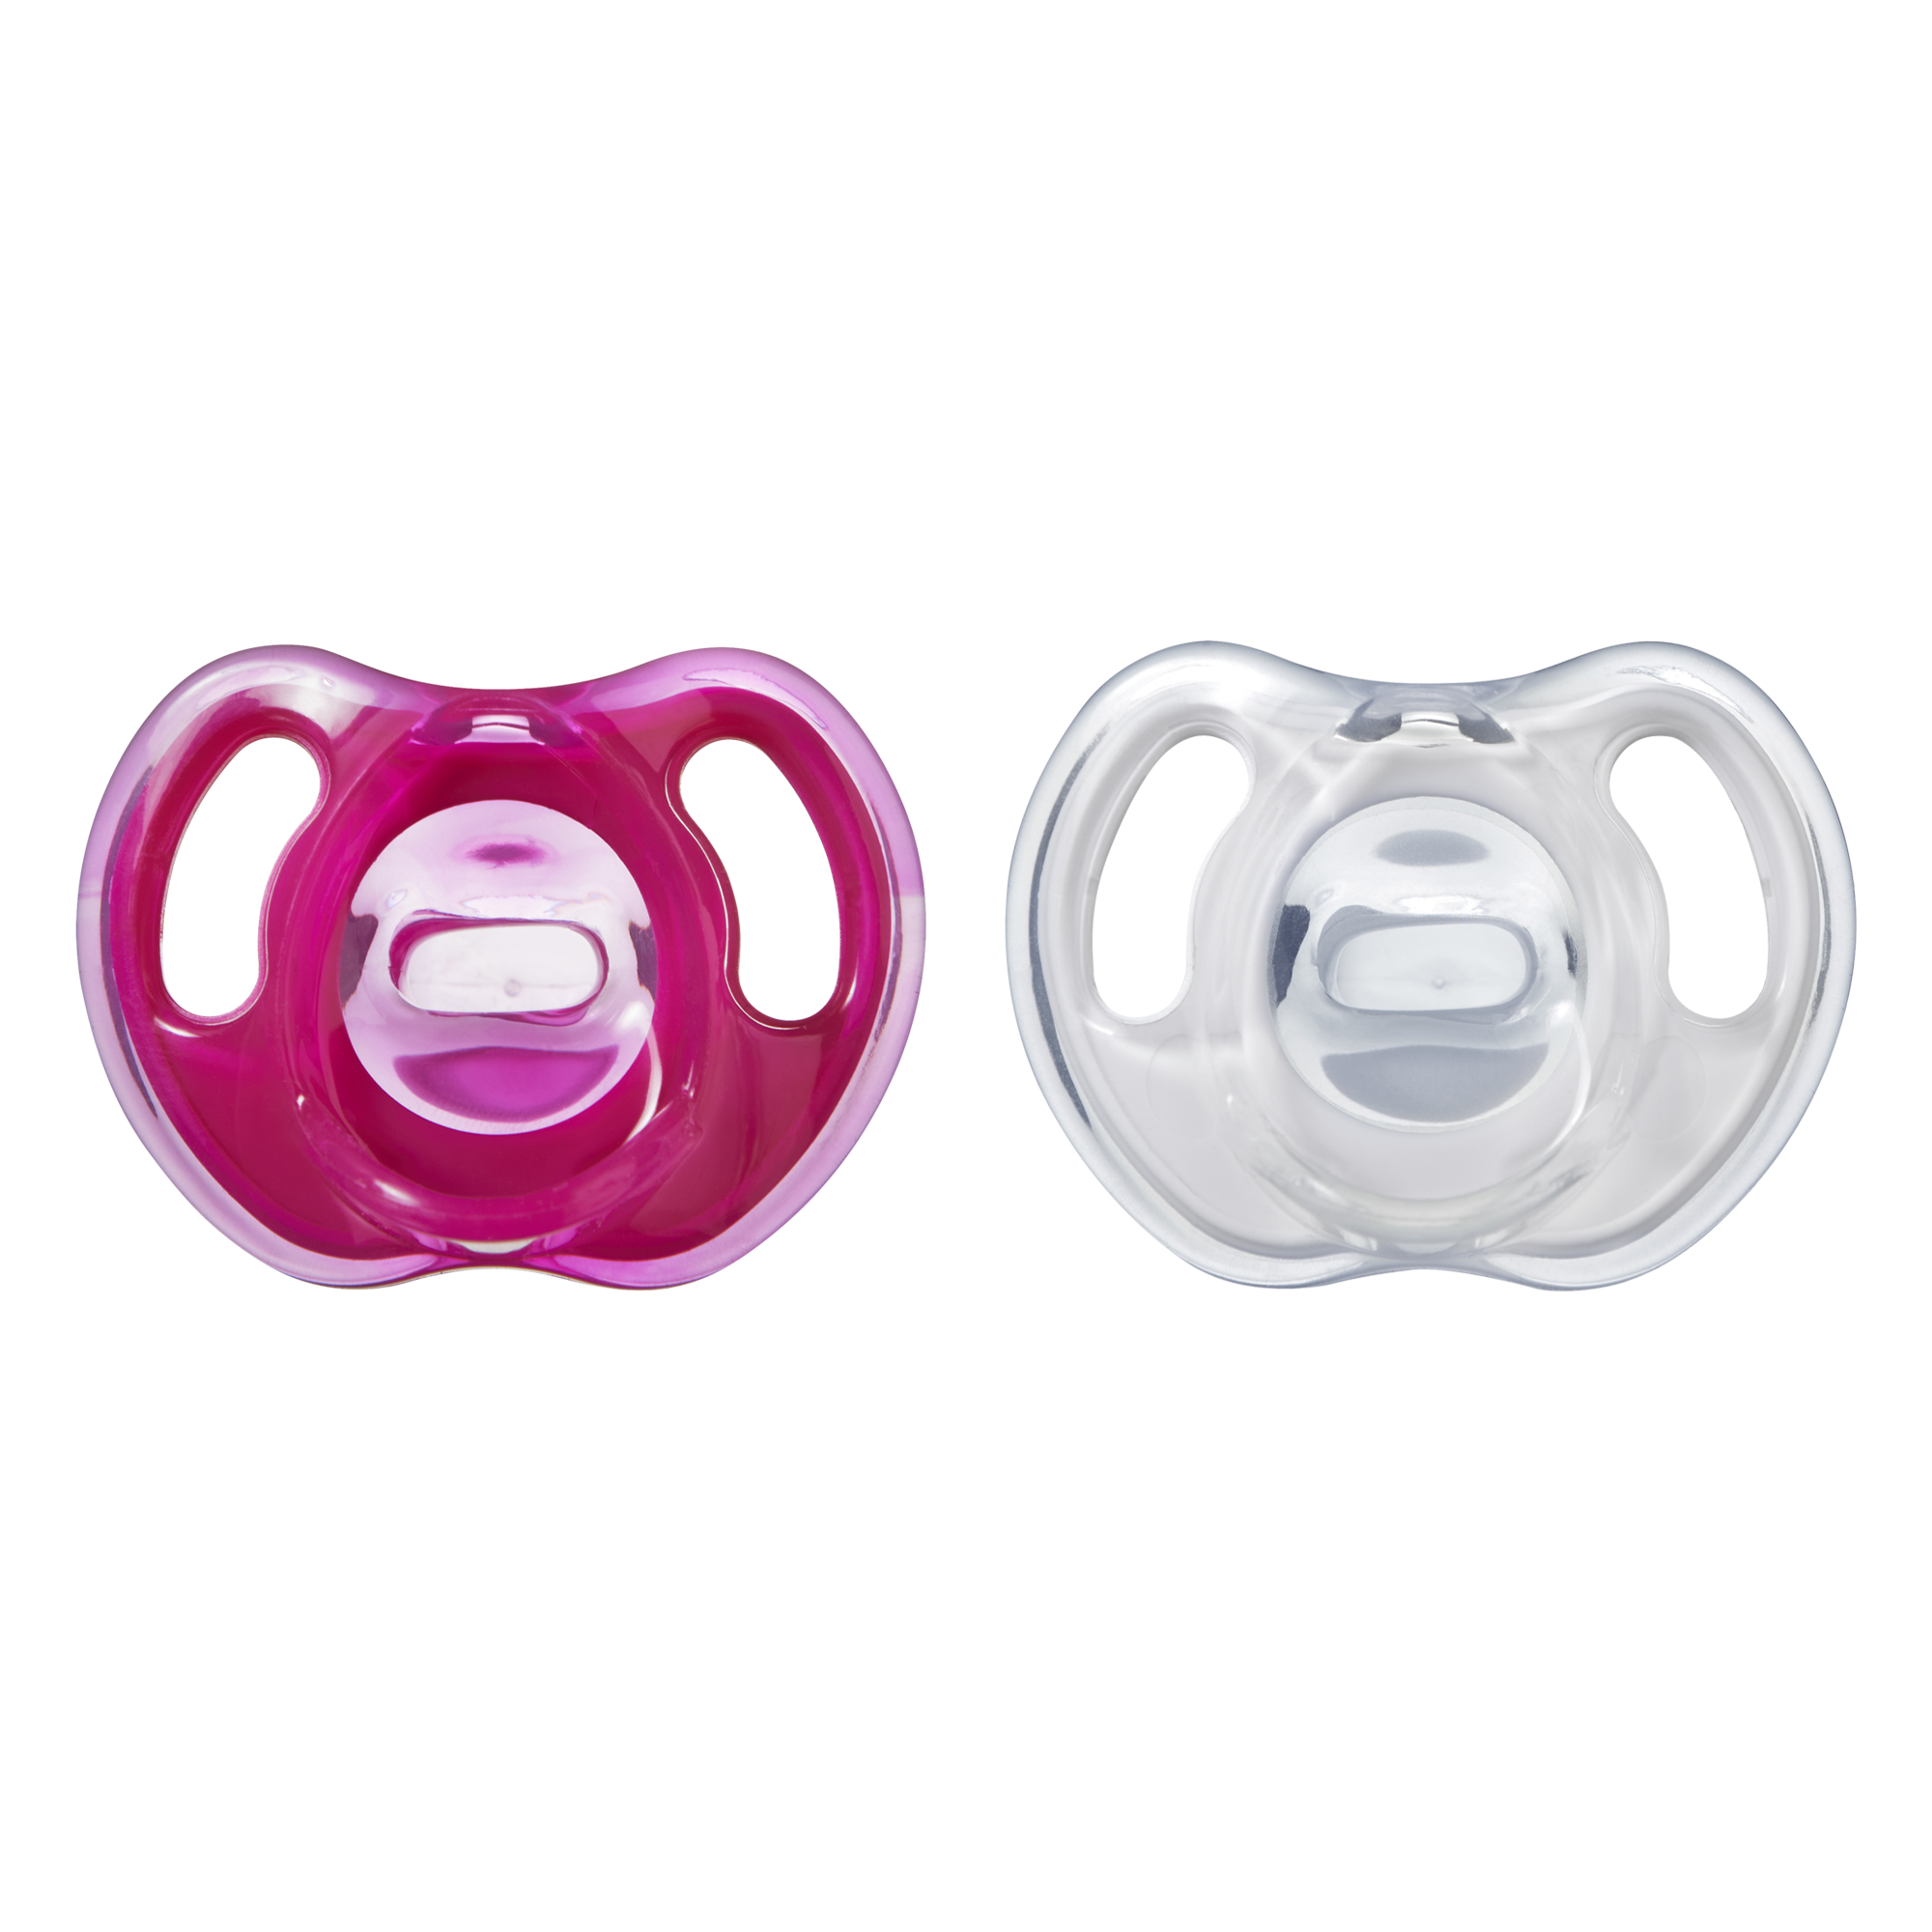 18-36M Silicone Soother 2-PK Tommee Tippee 433455